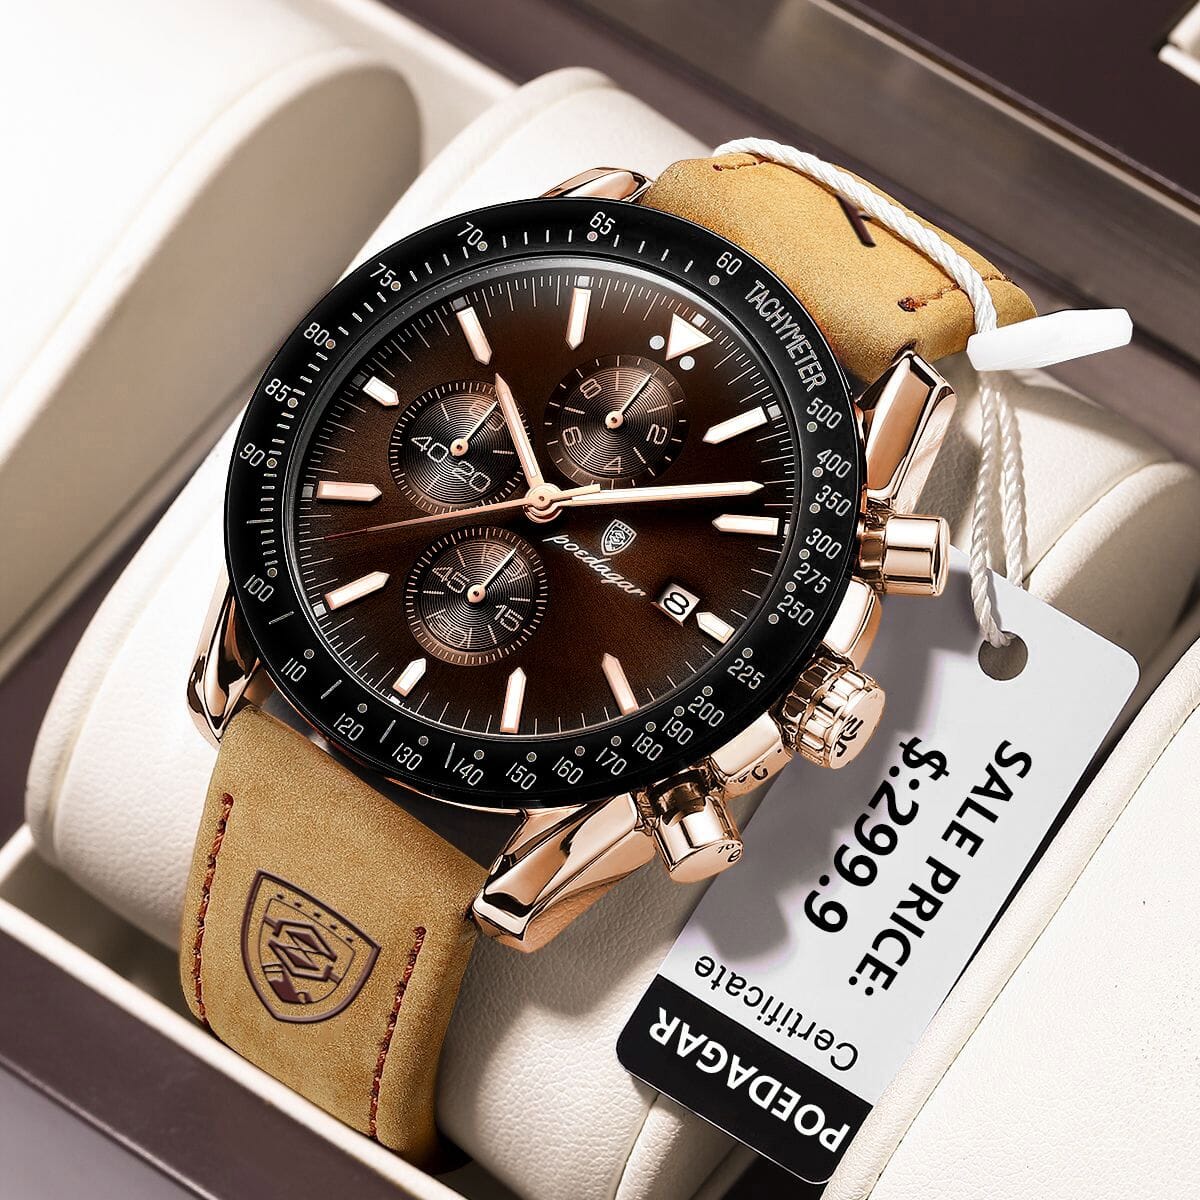 POEDAGAR Luxury Casual Sport Watch - Stay Fashionably on Time with Ease! - Water Resistant, Durable and Chic Mechanical Watches PikNik 